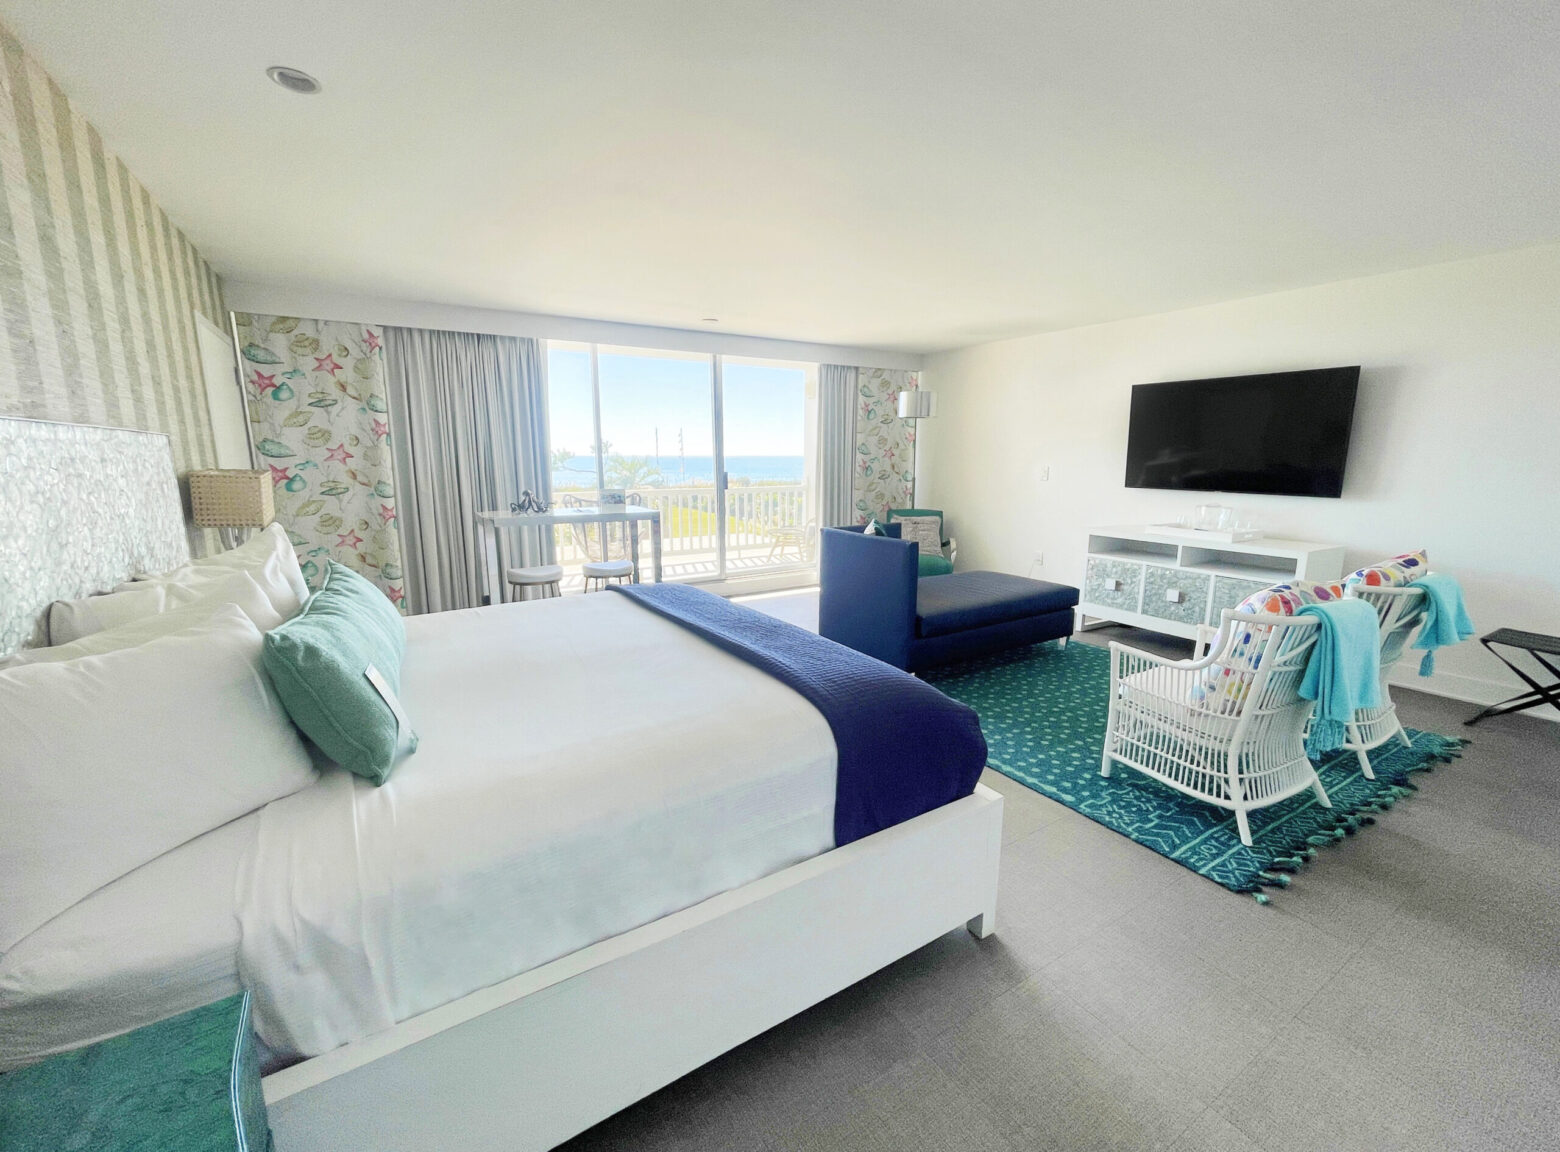 Colorful oceanfront stateroom with bed, seating and television.